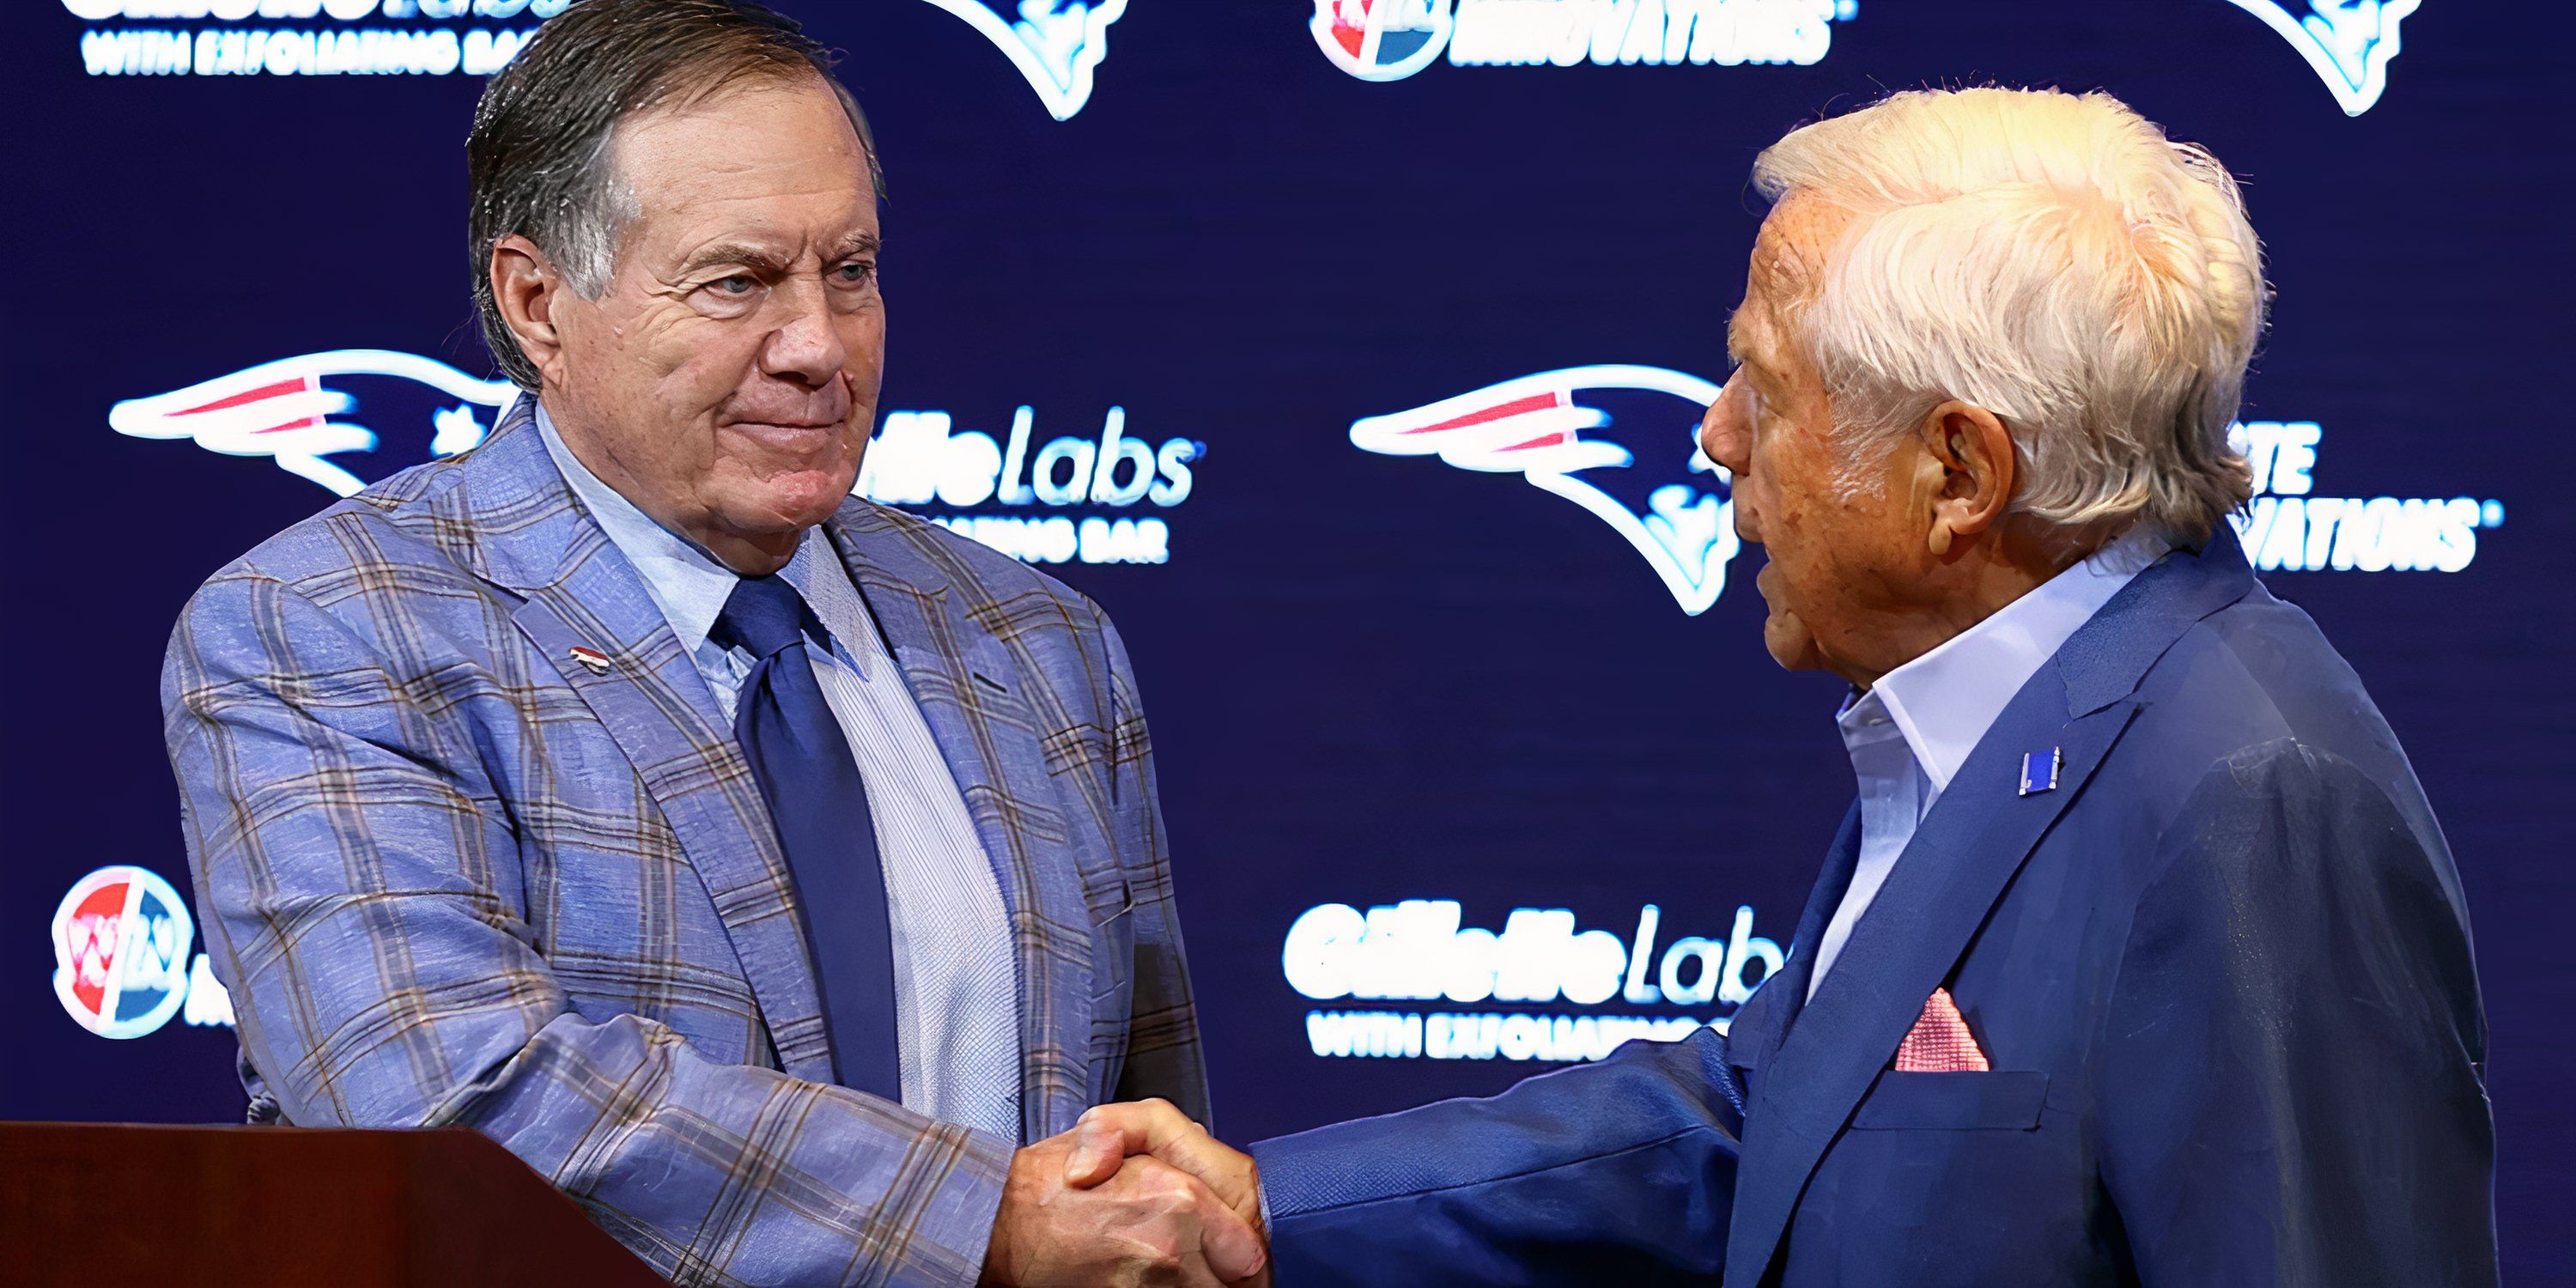 Head coach Bill Belichick, left, of the New England Patriots shakes hands with owner Robert Kraft during a press conference at Gillette Stadium Jan. 11, 2024, in Foxborough, Mass. Belichick announced he is stepping down as head coach after 24 seasons with the team.